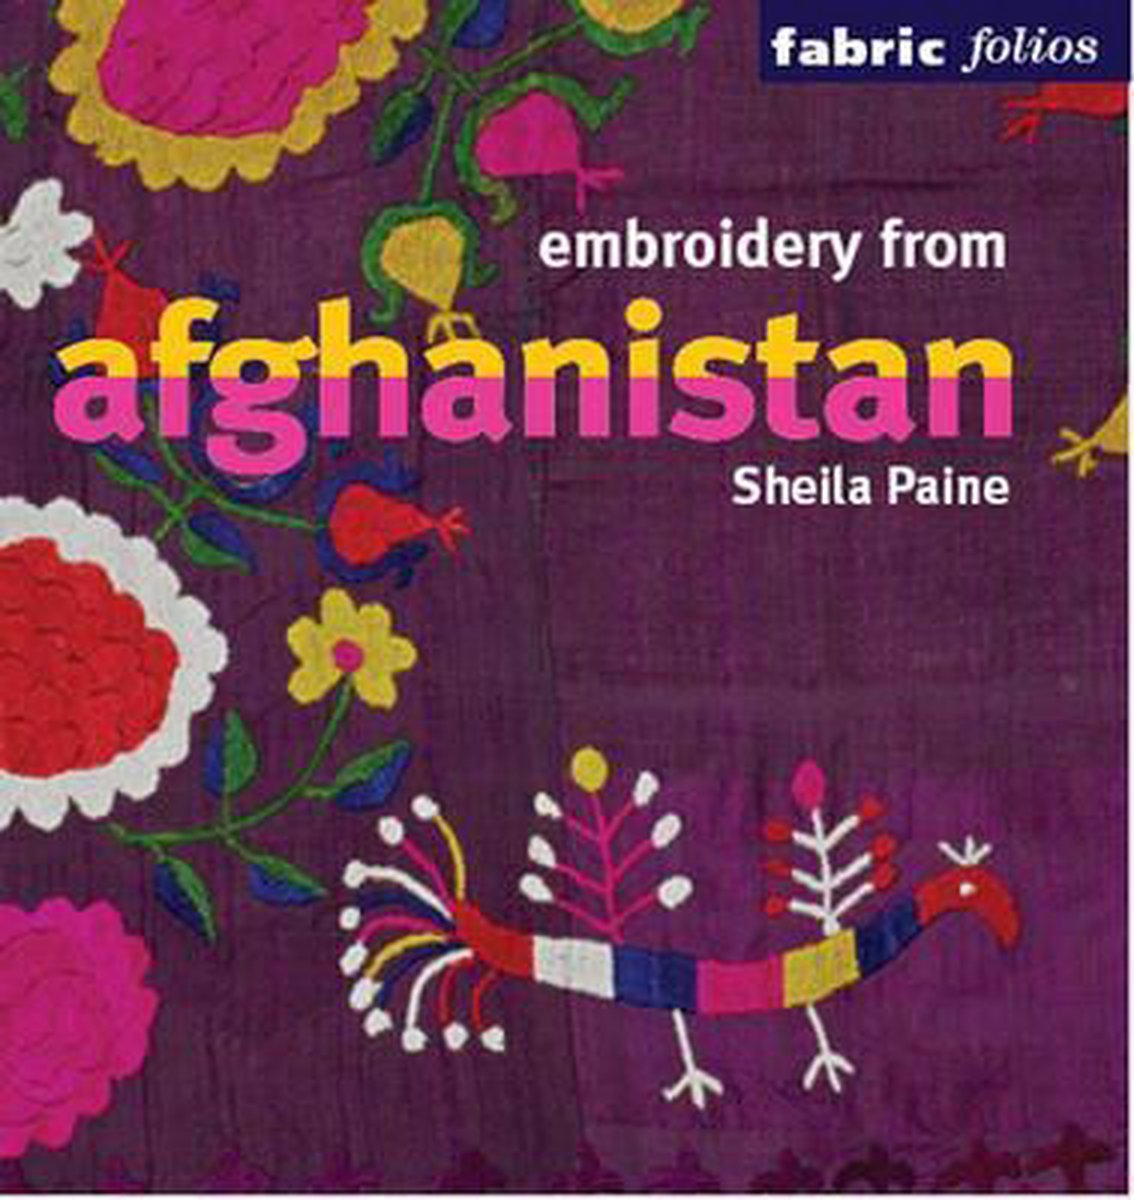 Embroidery from Afghanistan (Fabric Folios)